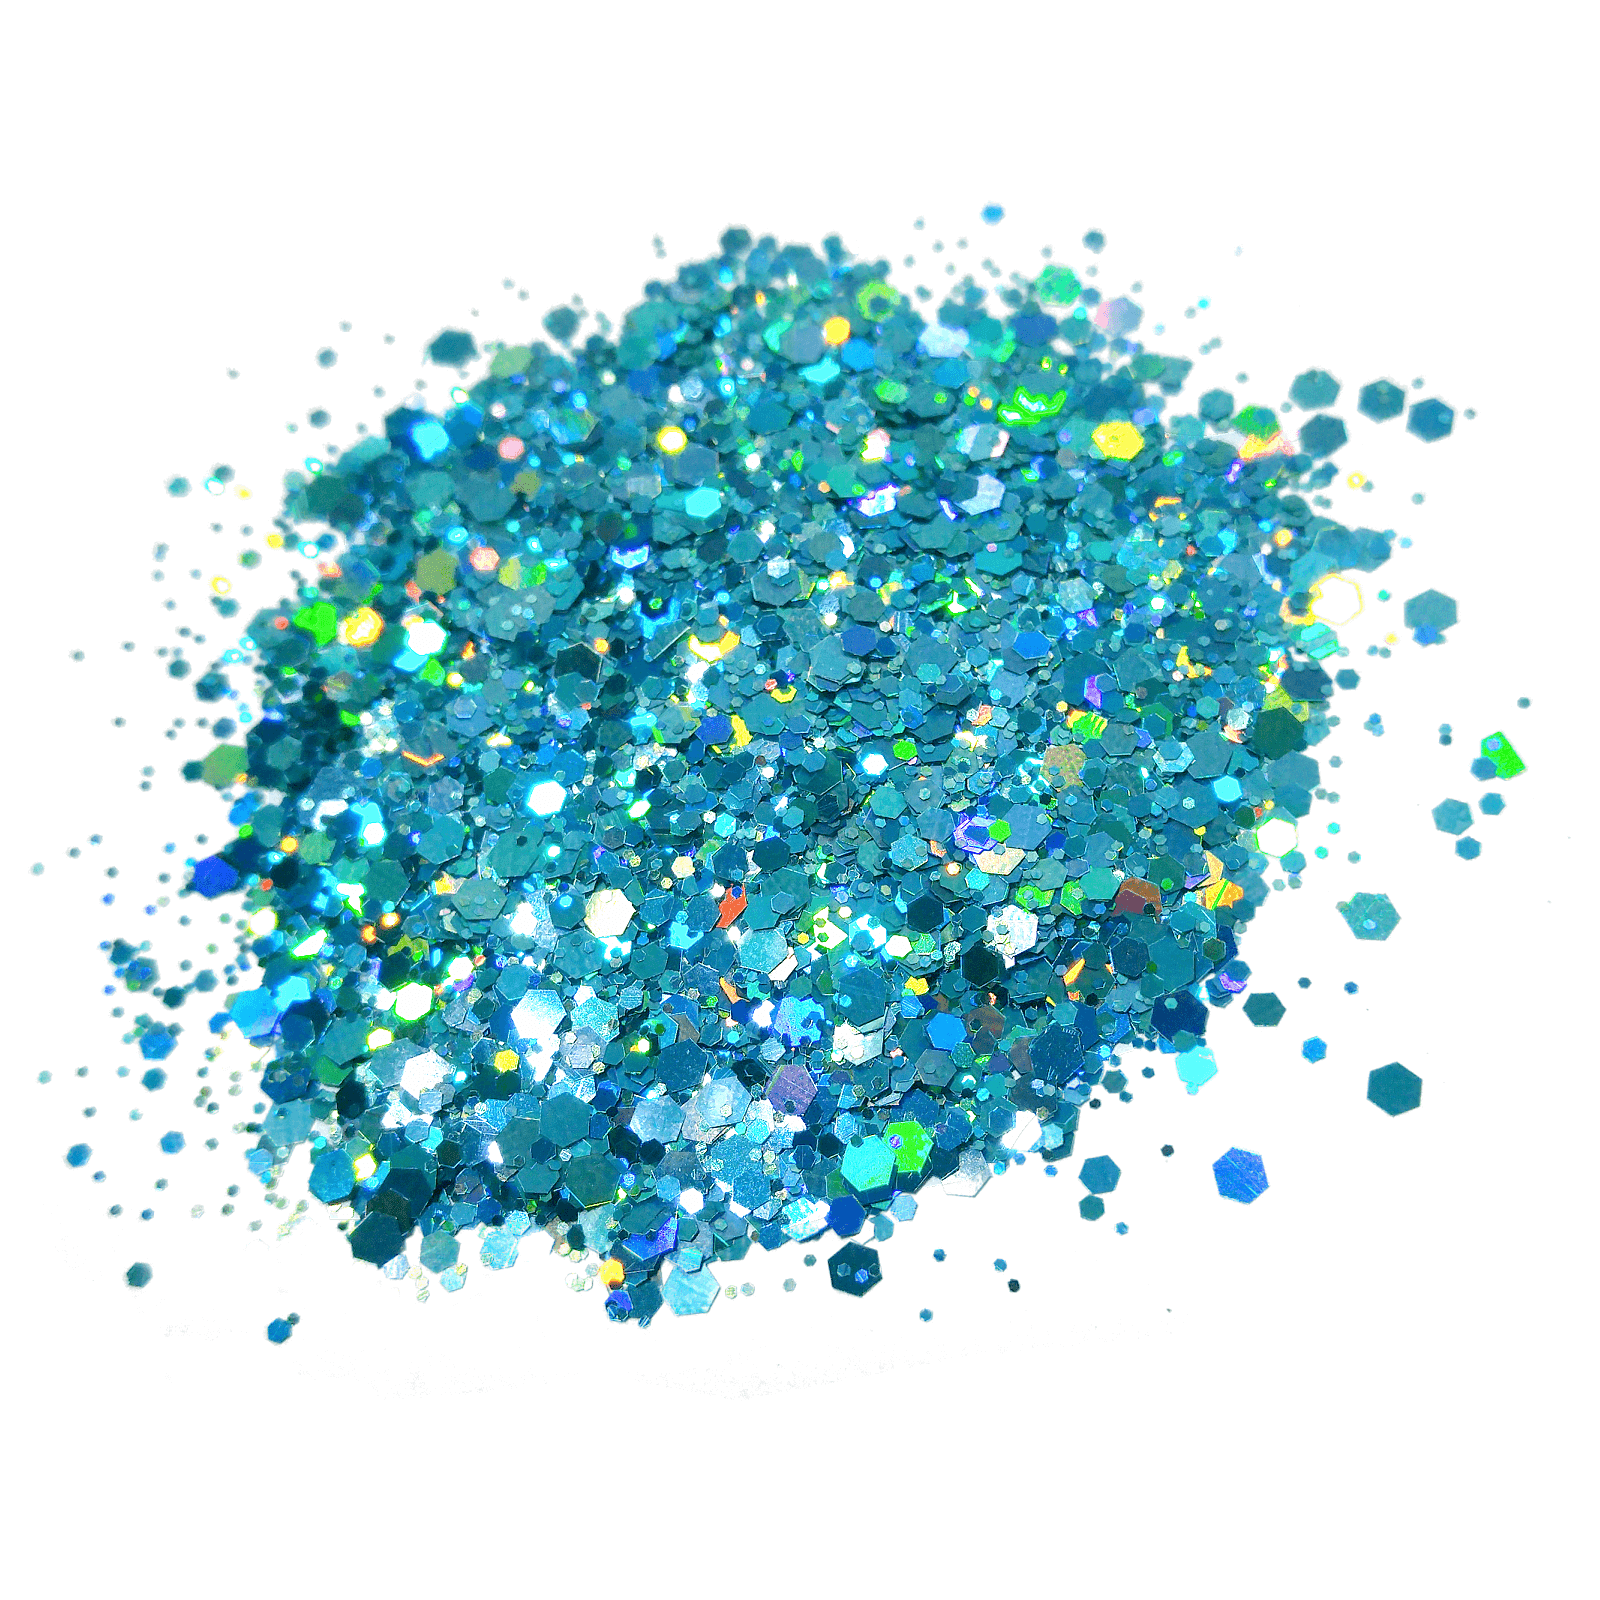 Turquoise Holographic Hexagon Glitter Mix By Crazoulis Glitter